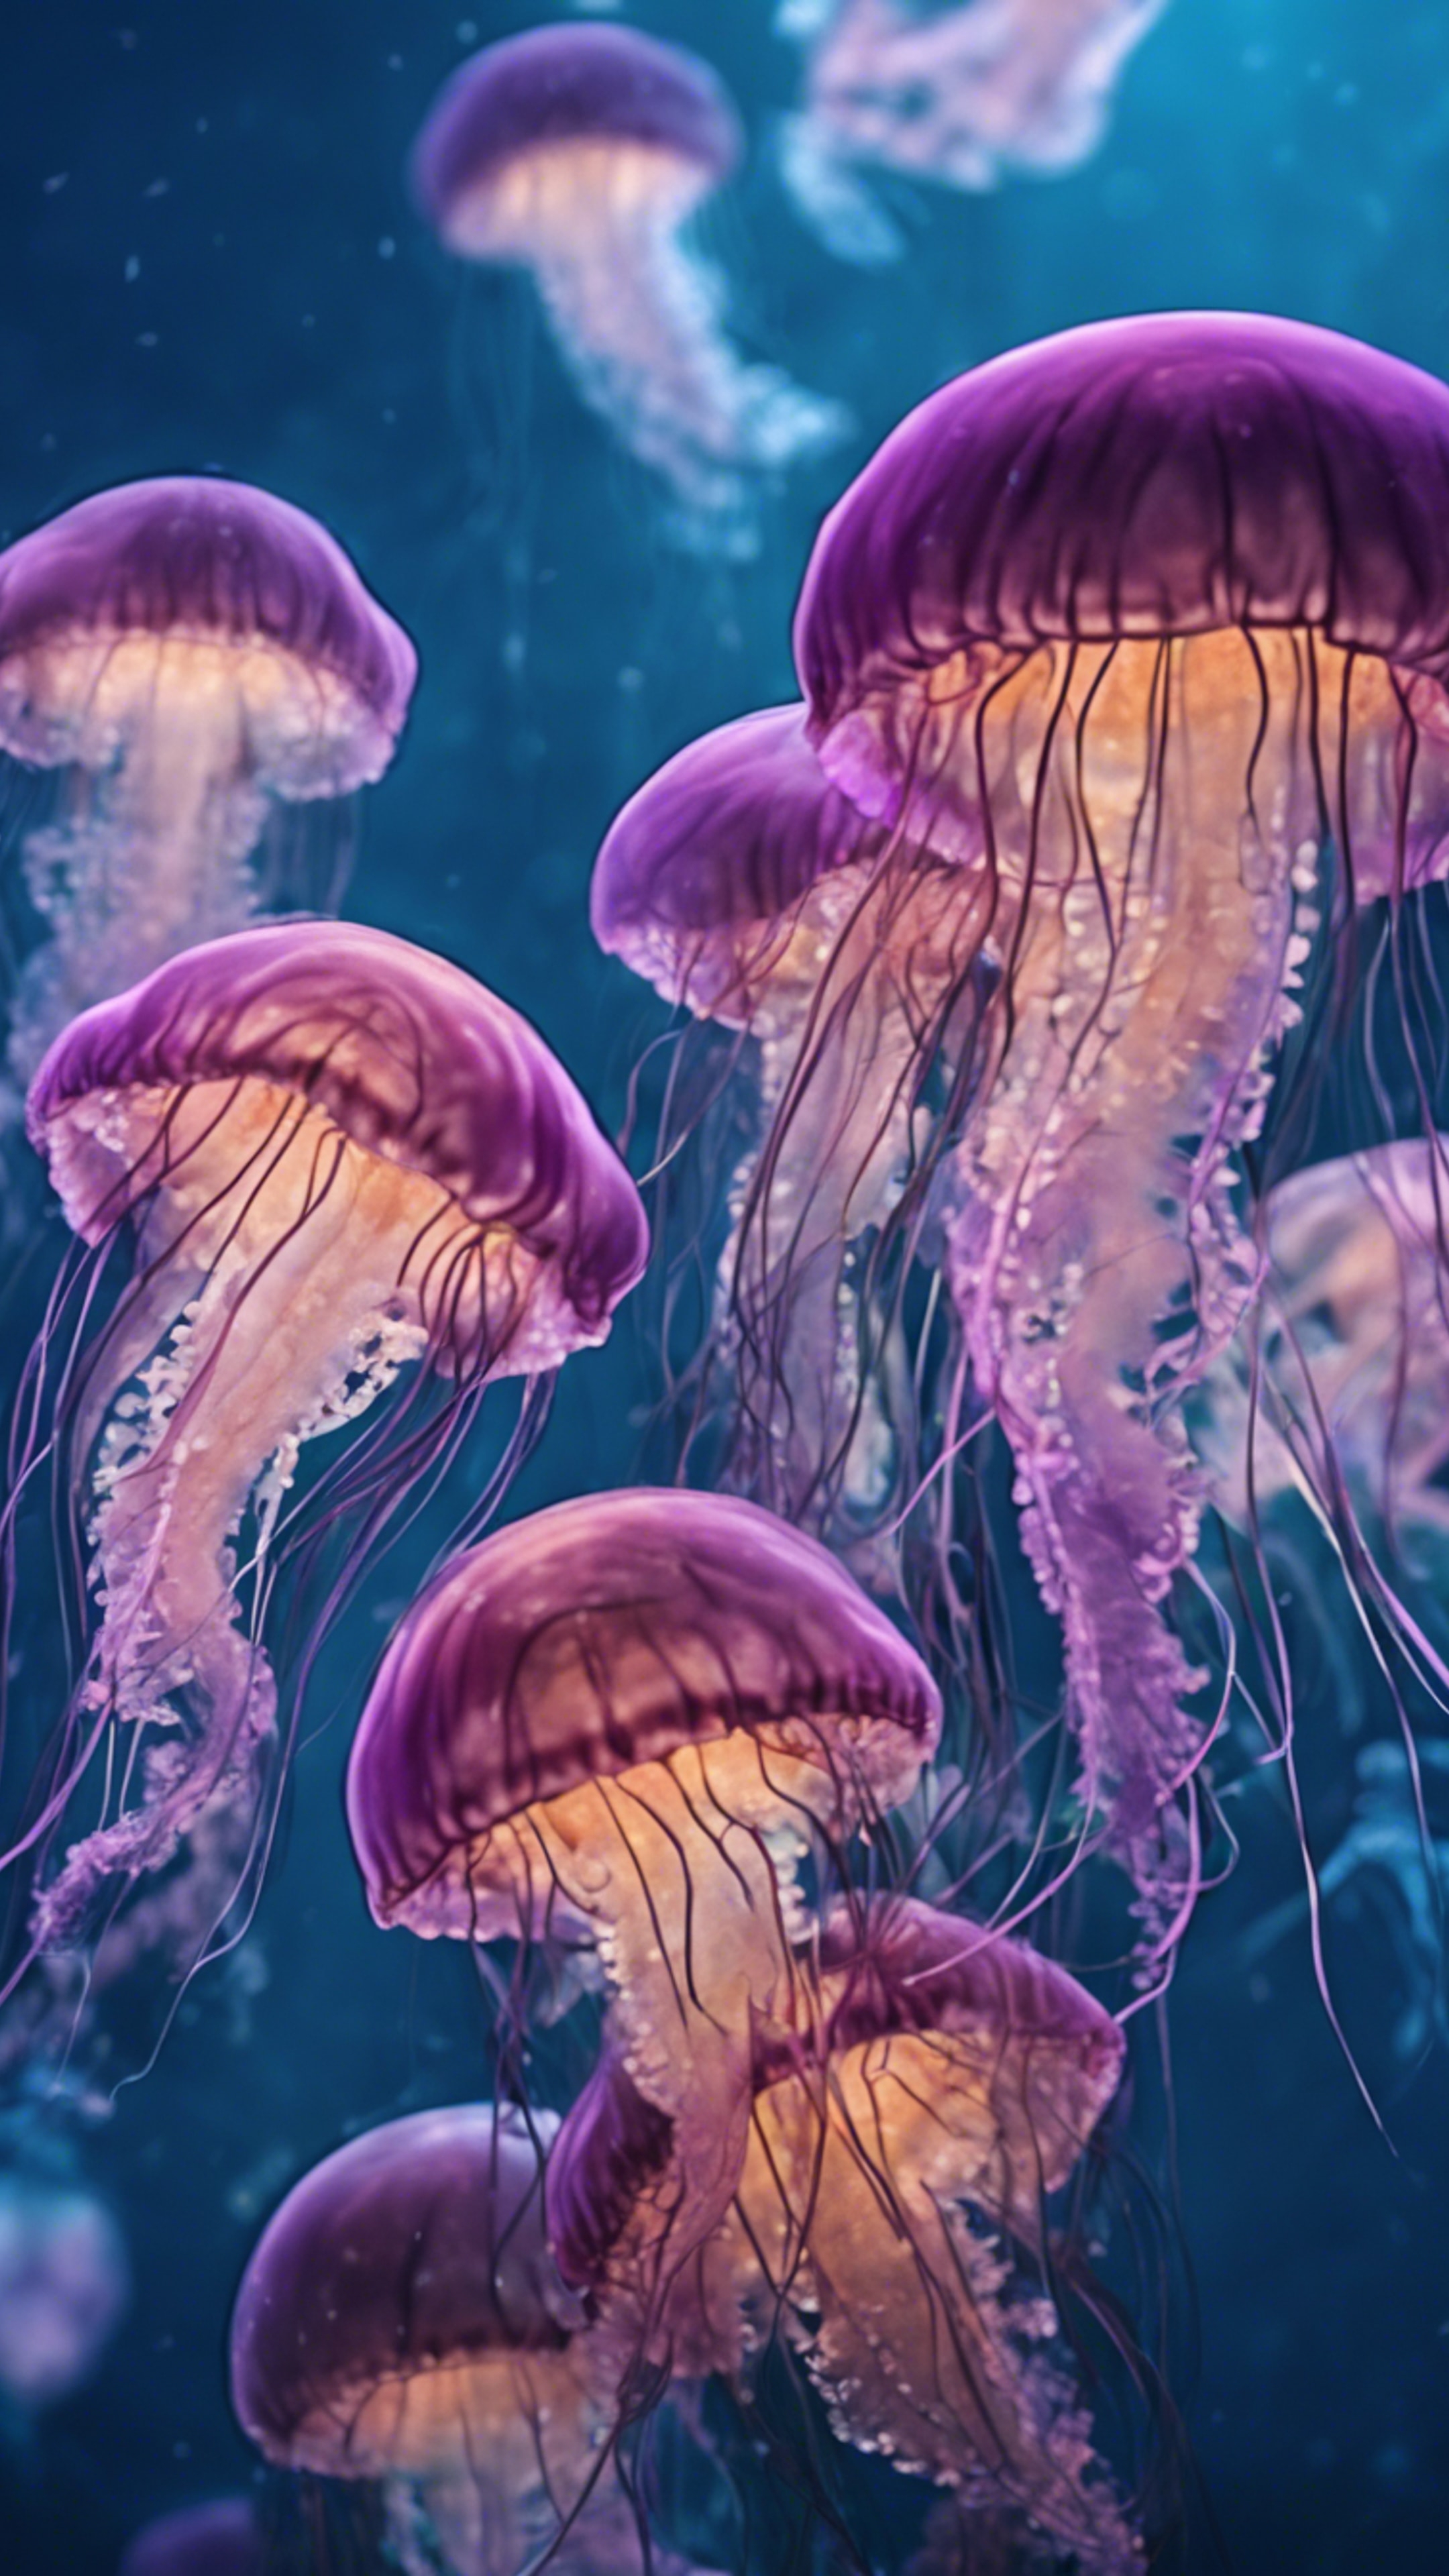 A detailed illustration of a group of ethereal jellyfish glowing in hues of blues and purples in the deep ocean. Обои[9d08a2d997244e79aa03]